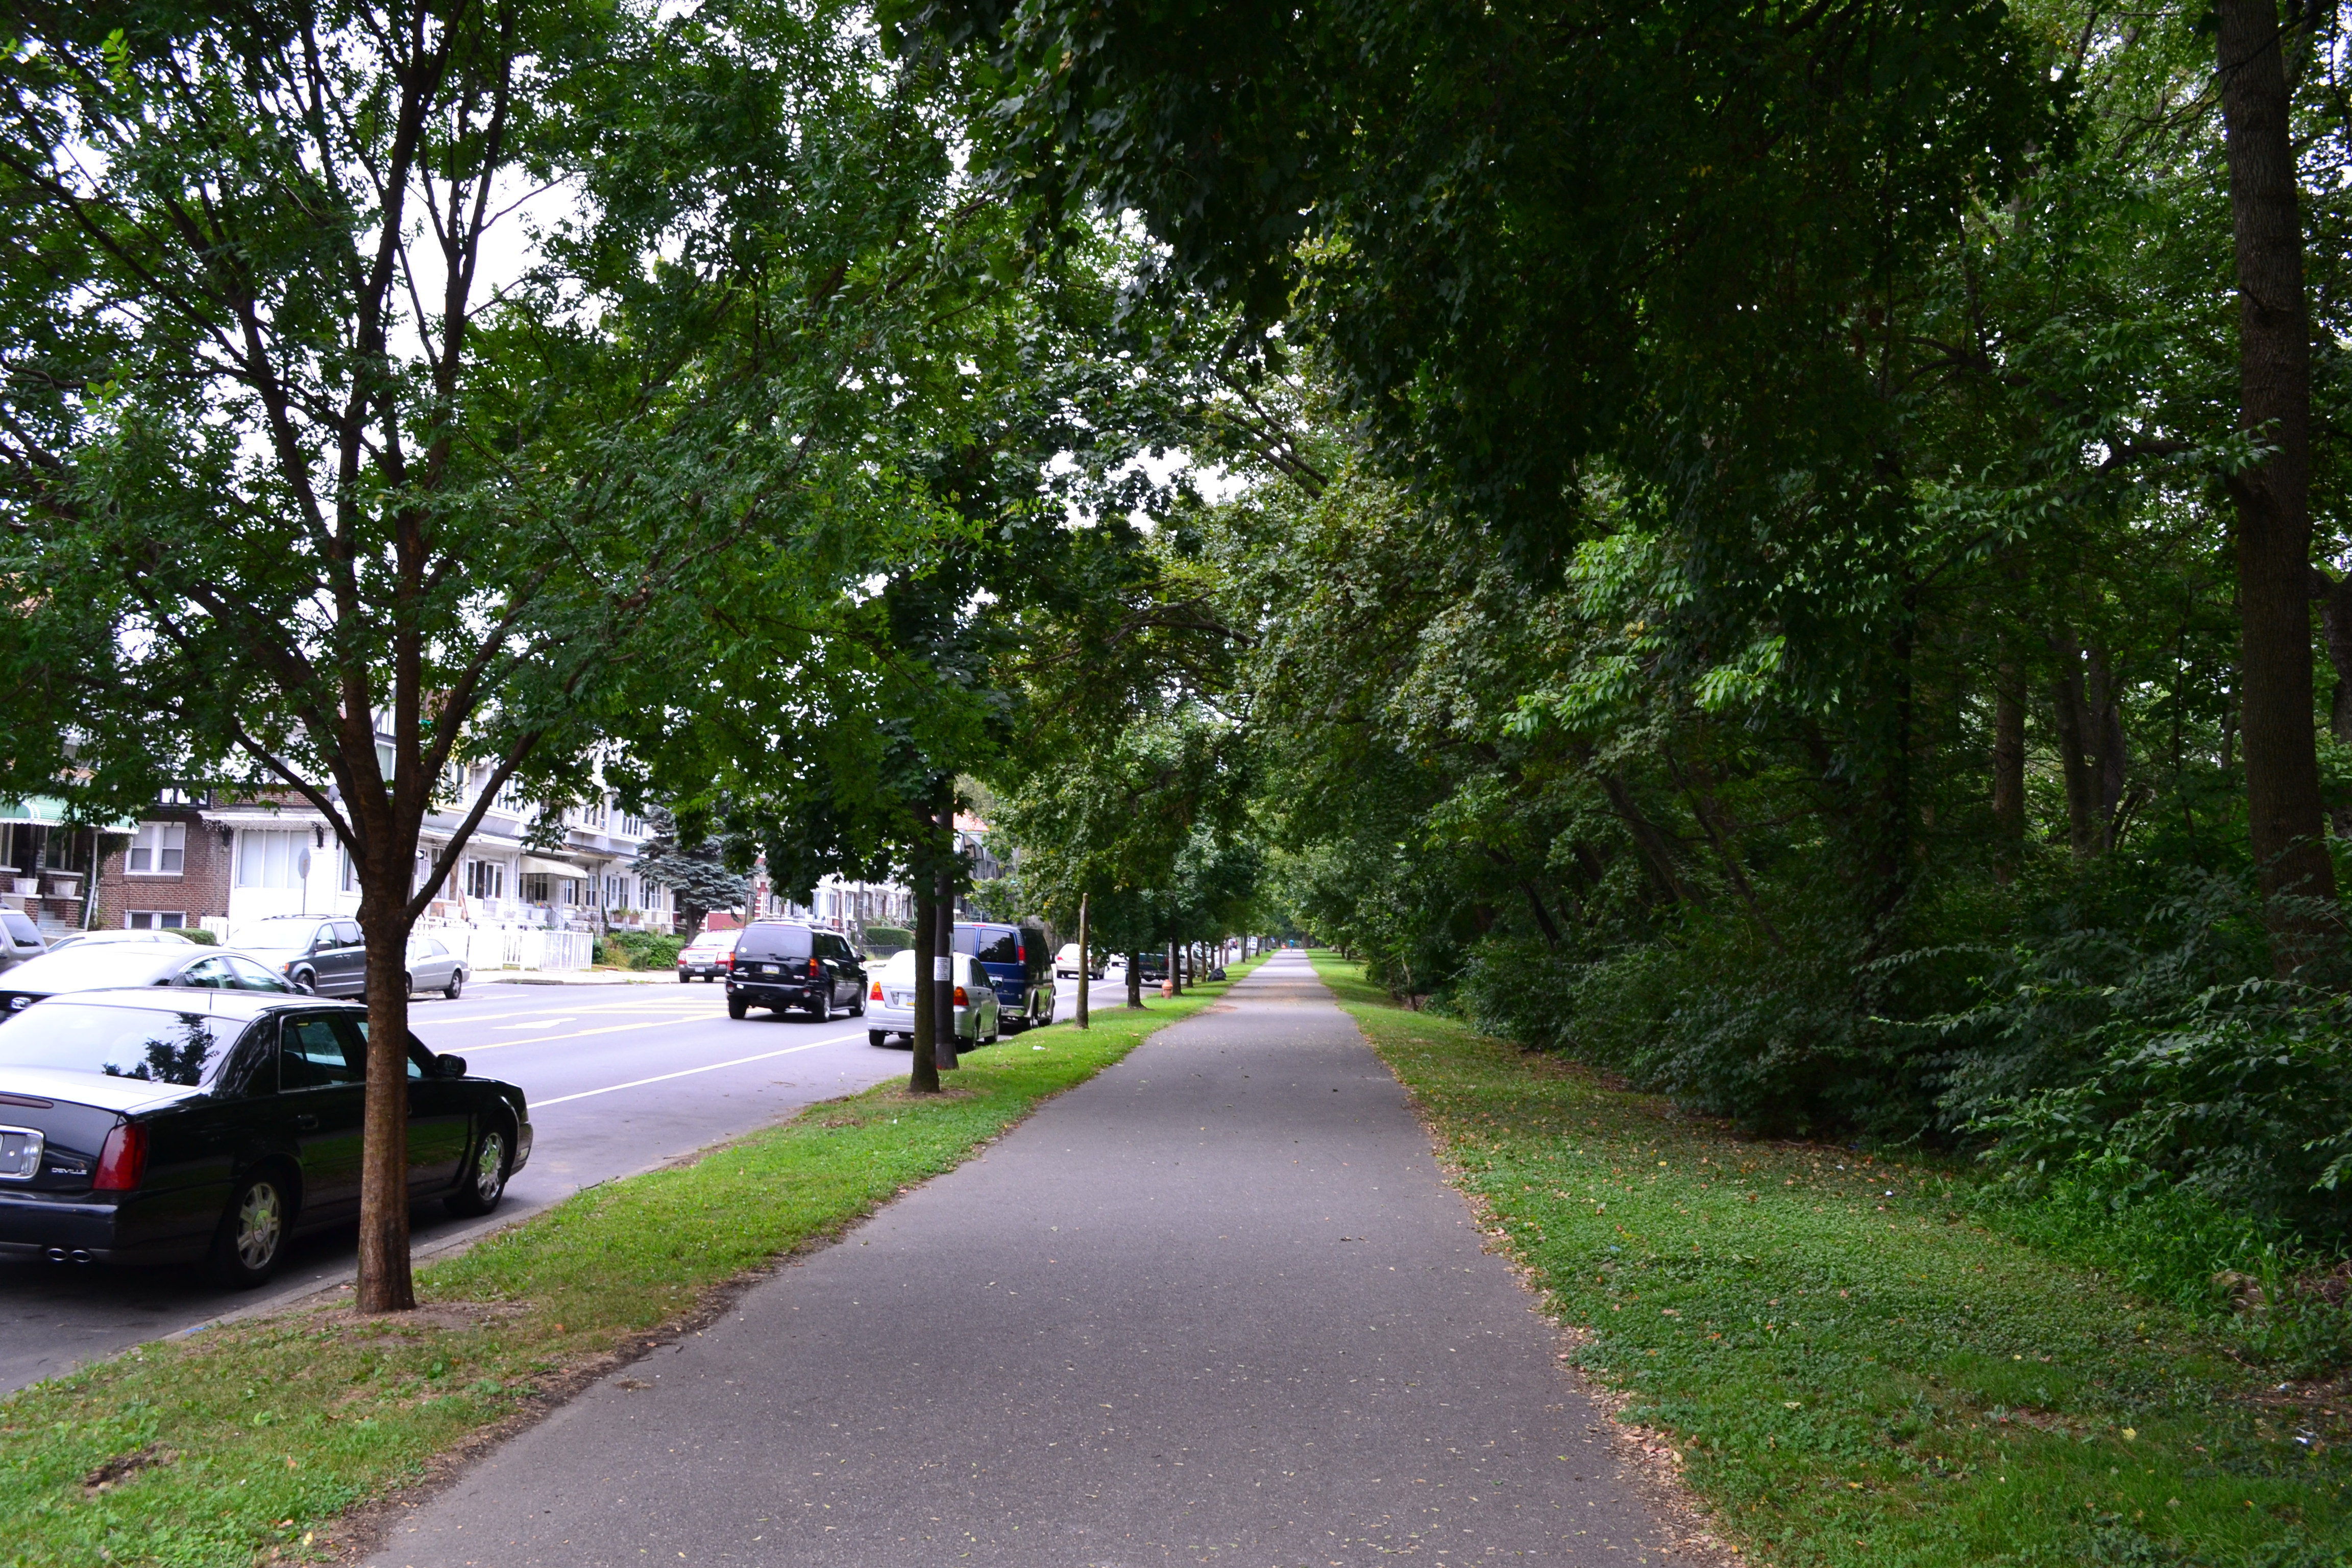 The Cobbs Creek Trail is a mostly off-road, paved trail that runs along Cobbs Creek Park from 63rd and Market streets to approximately 70th Street and Woodland Ave